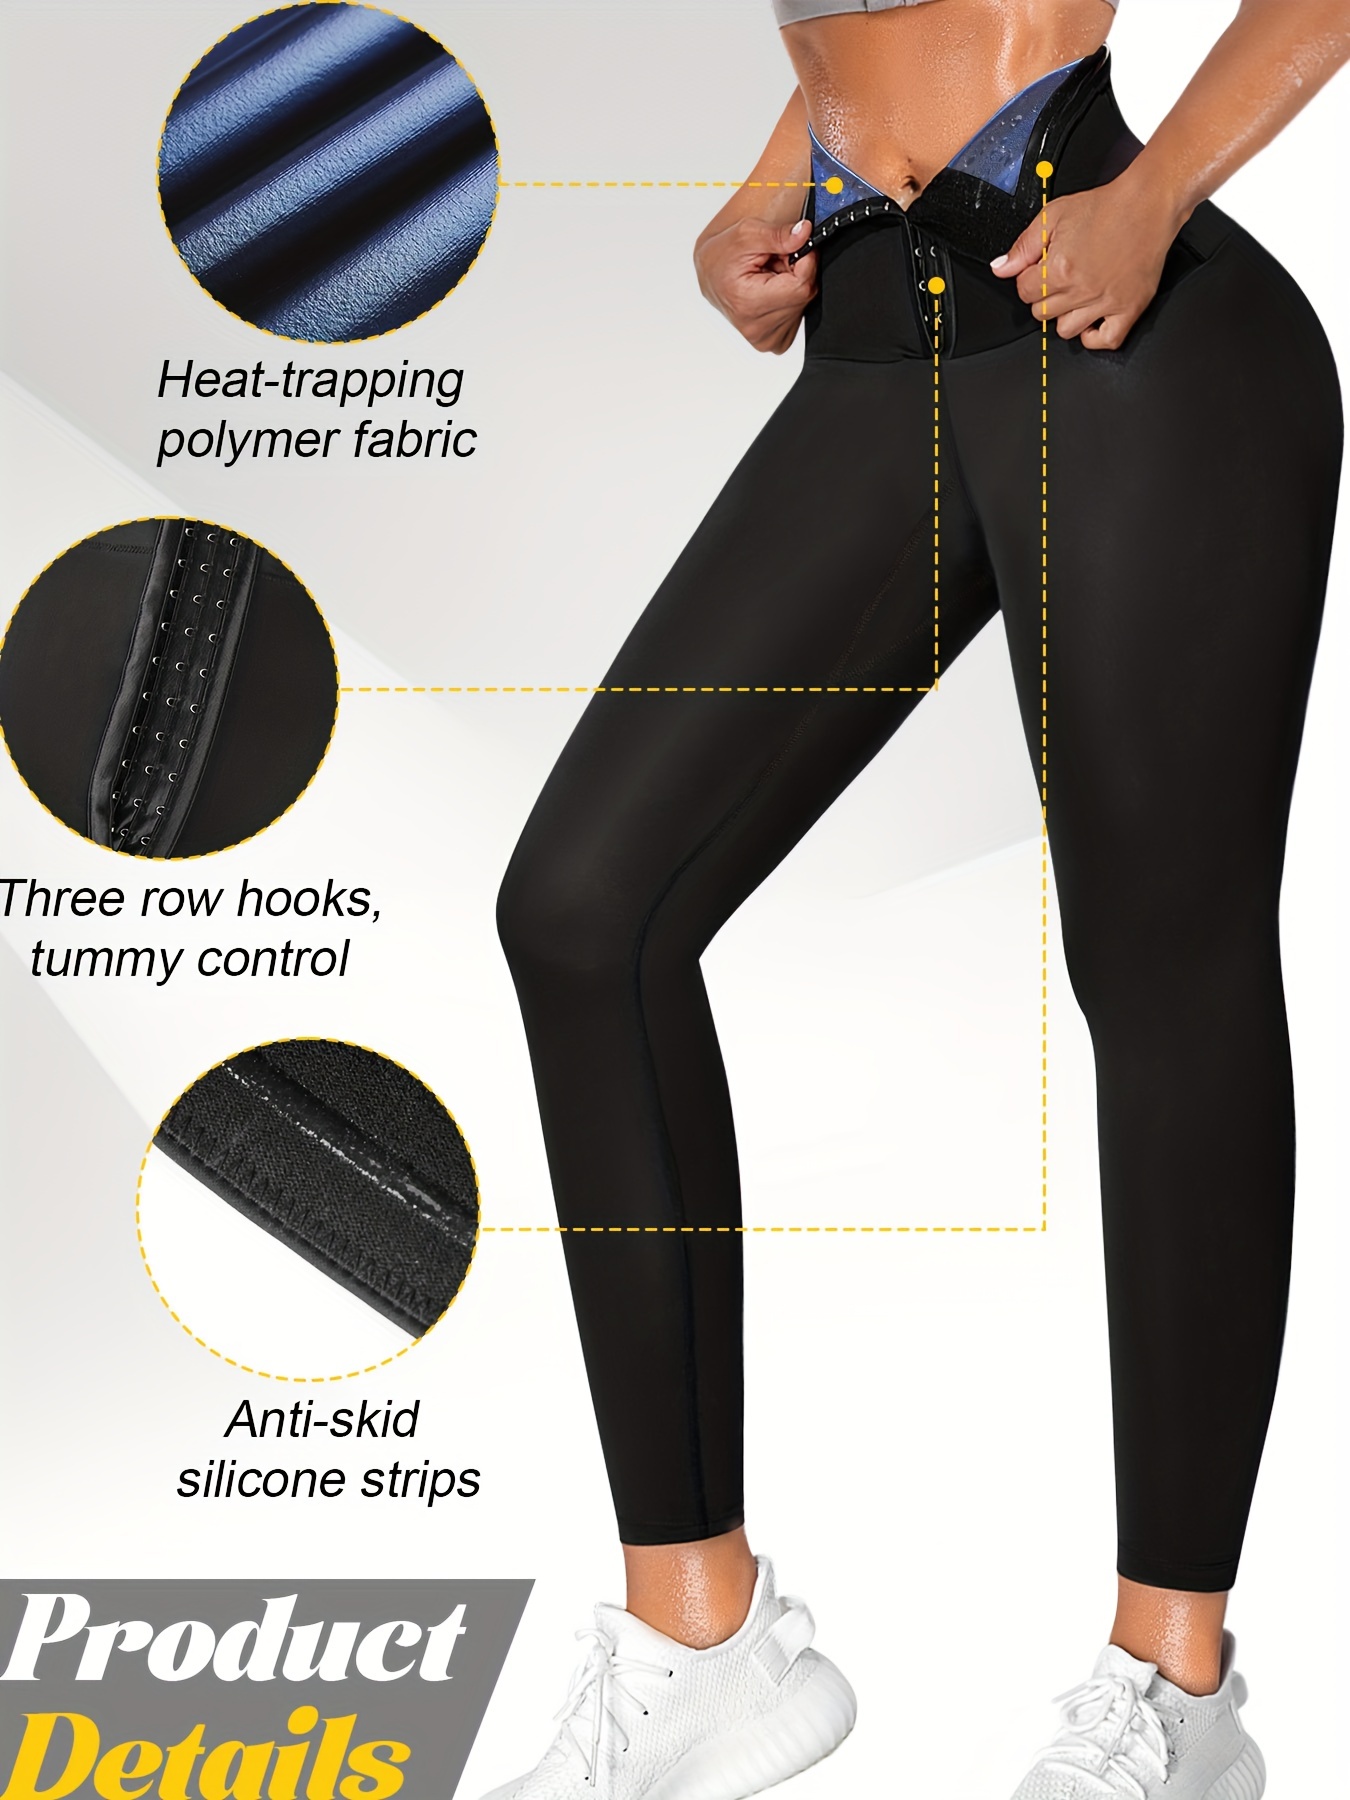 Women's Sauna Sport High Waist Compression Thermal Warm Exercise Training  Body Shaping Leggings